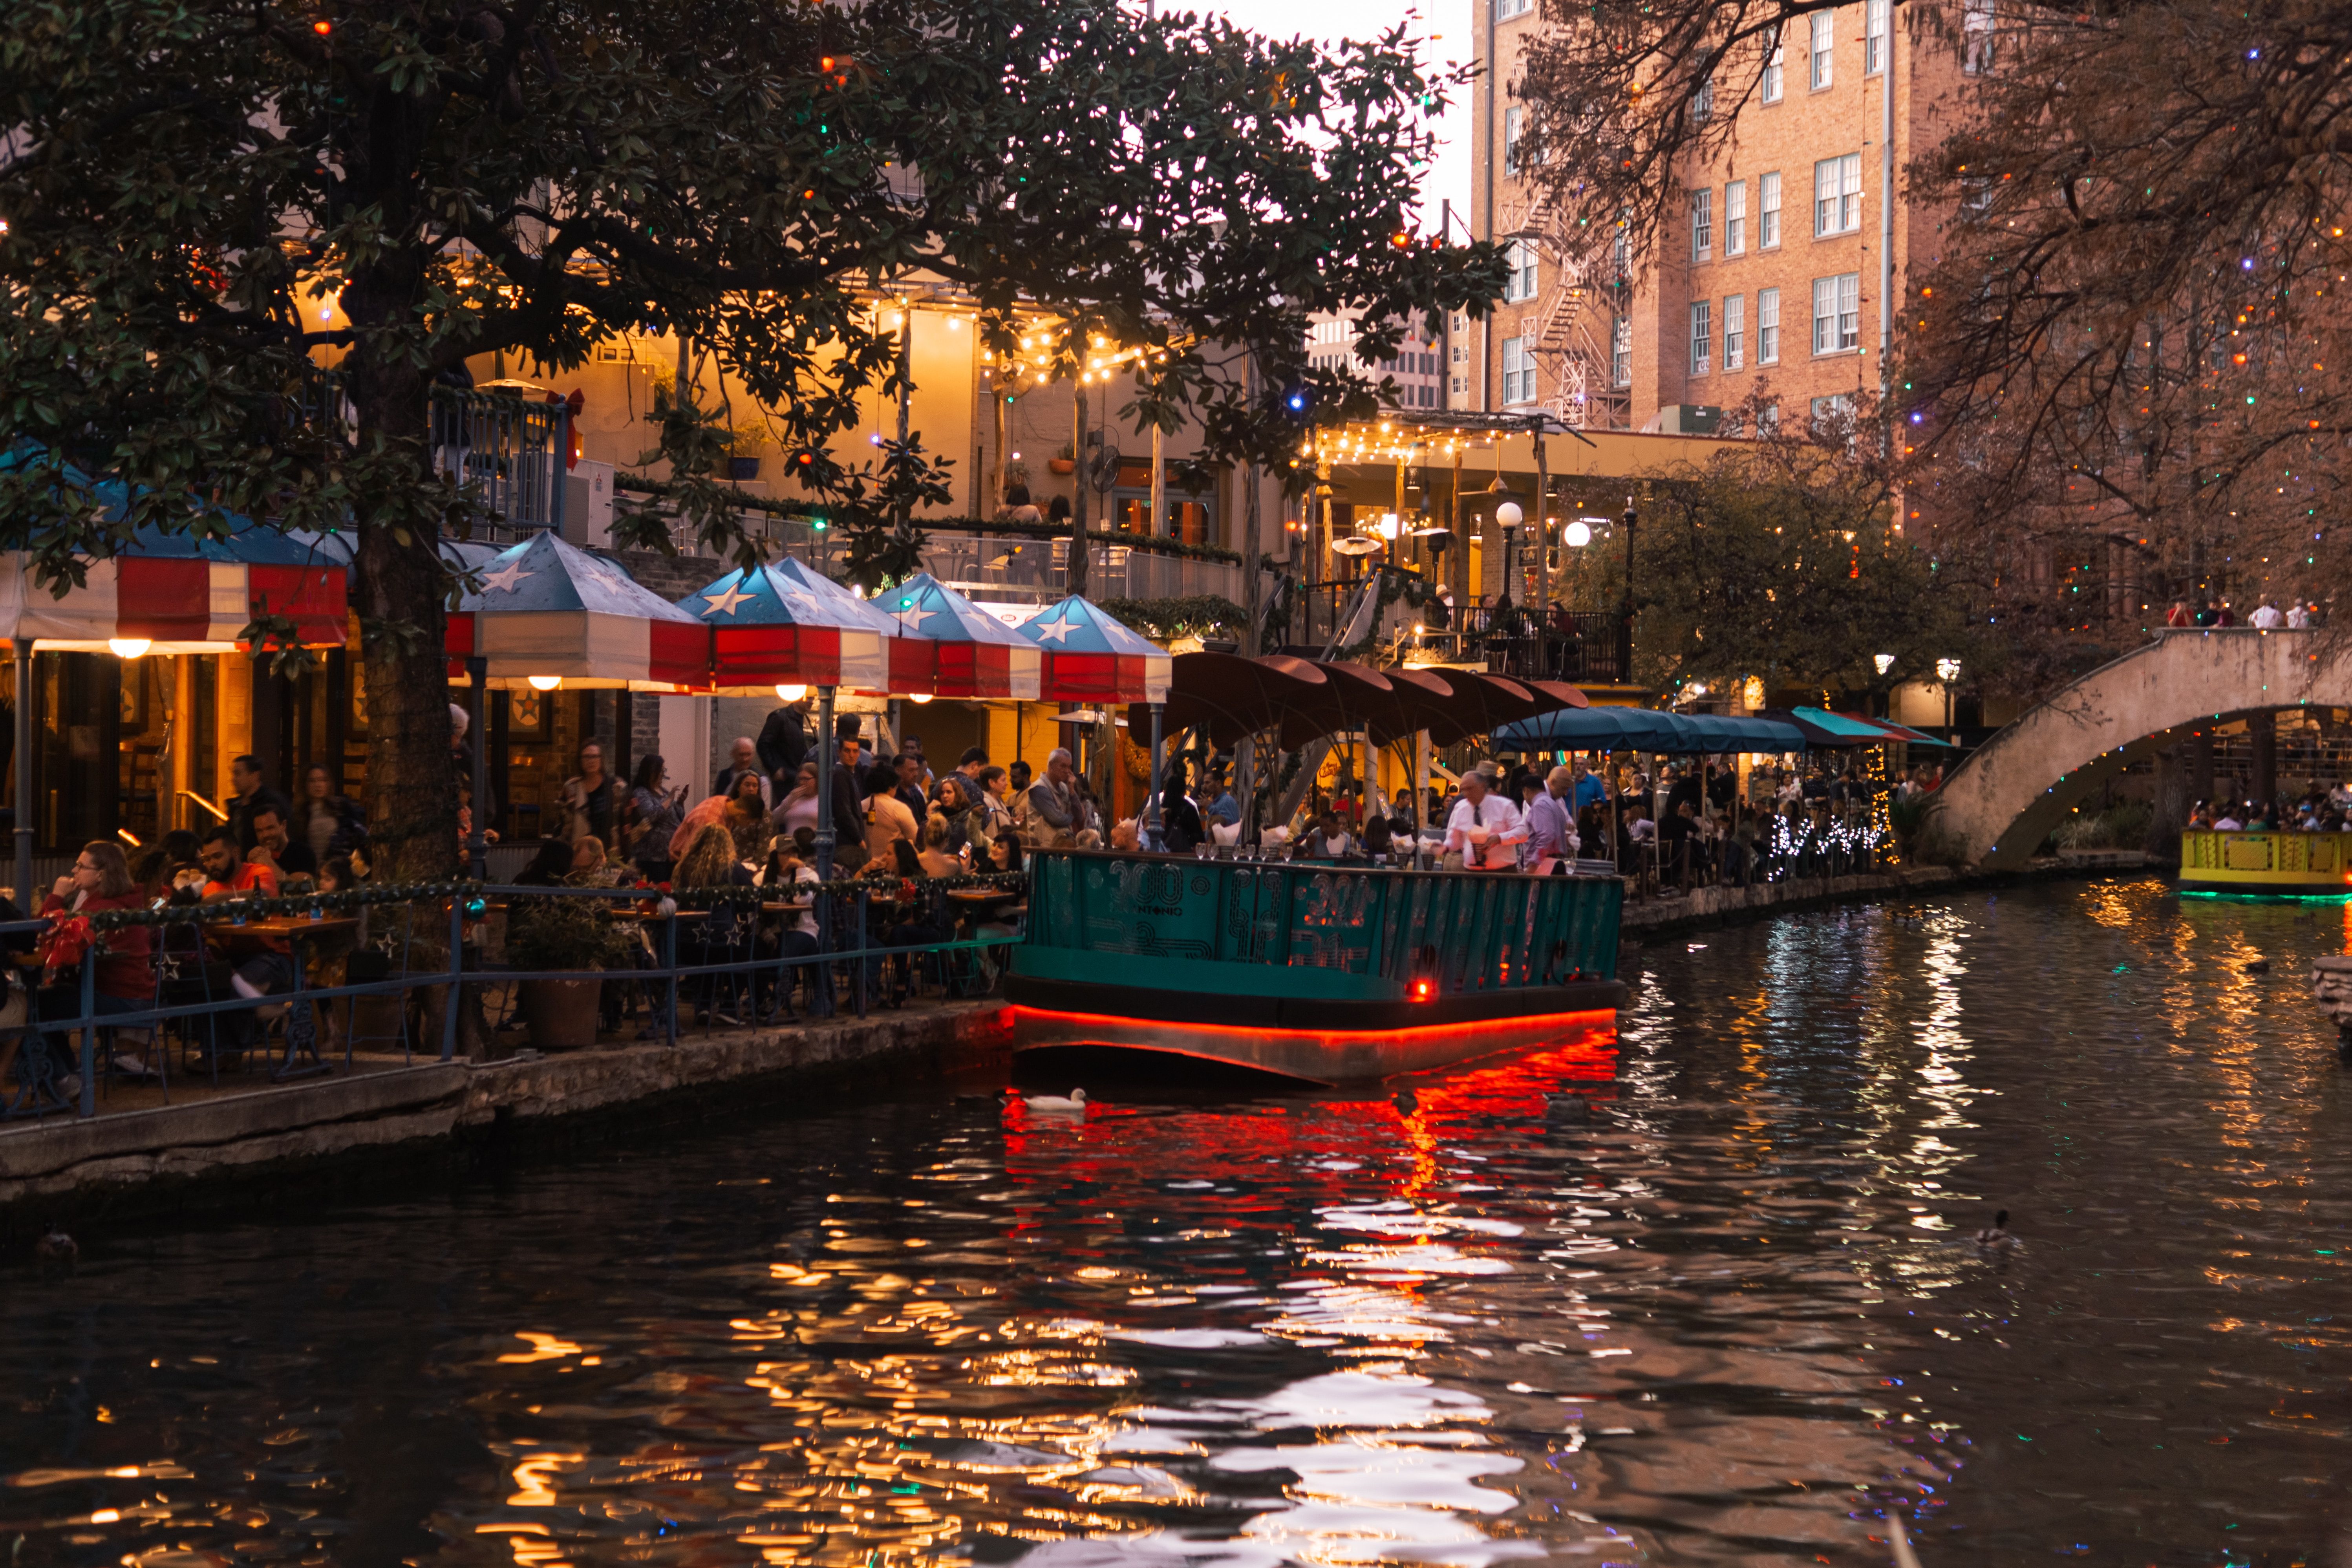 Boat In The Water Of A Canal With People Dining Along The Shore In San Antonio, Texas